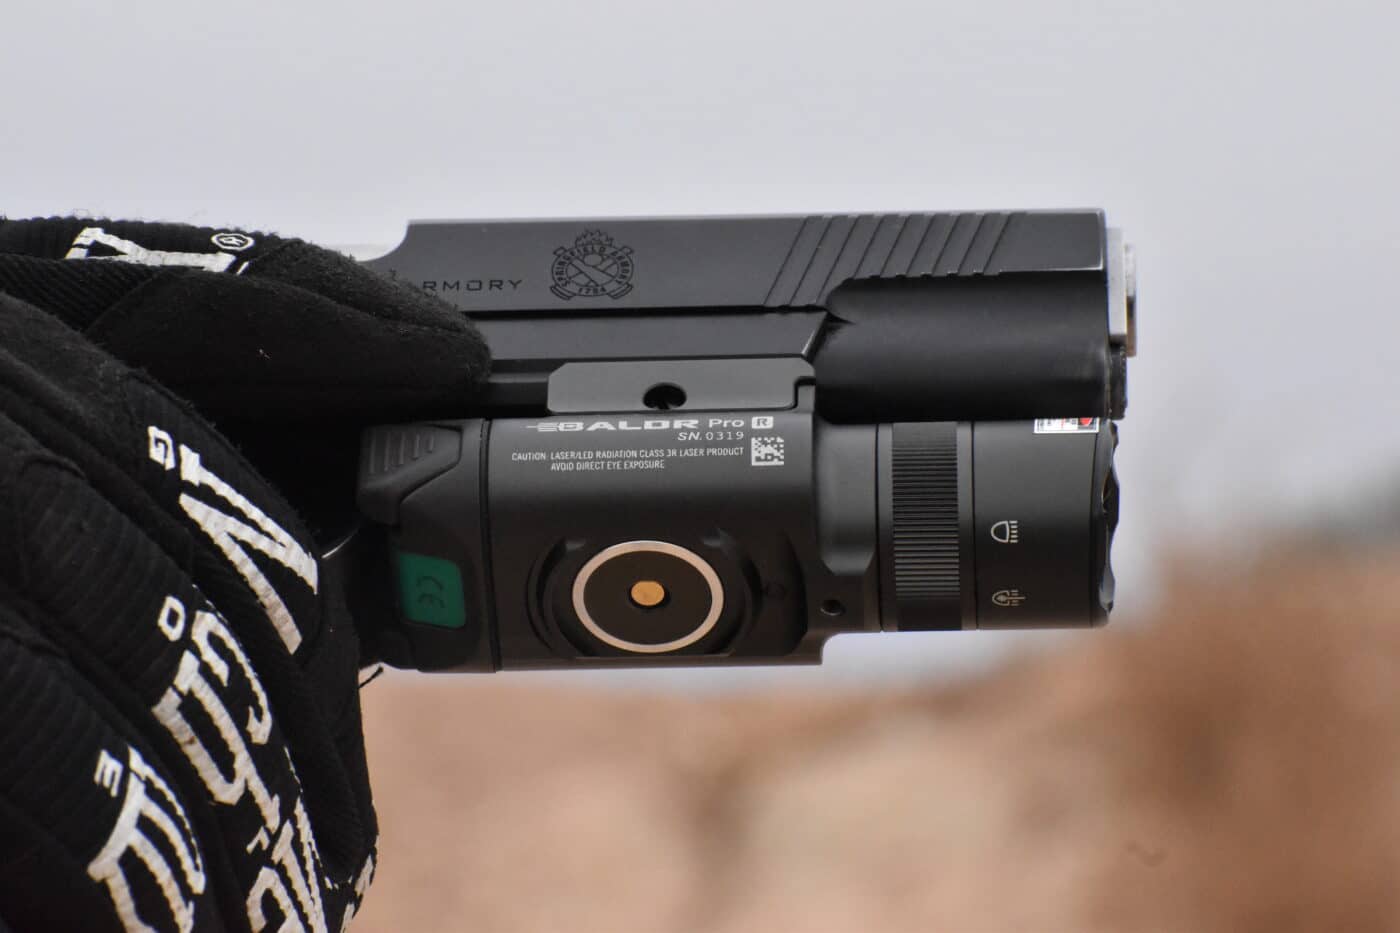 Range review of the Baldr Pro R weaponlight